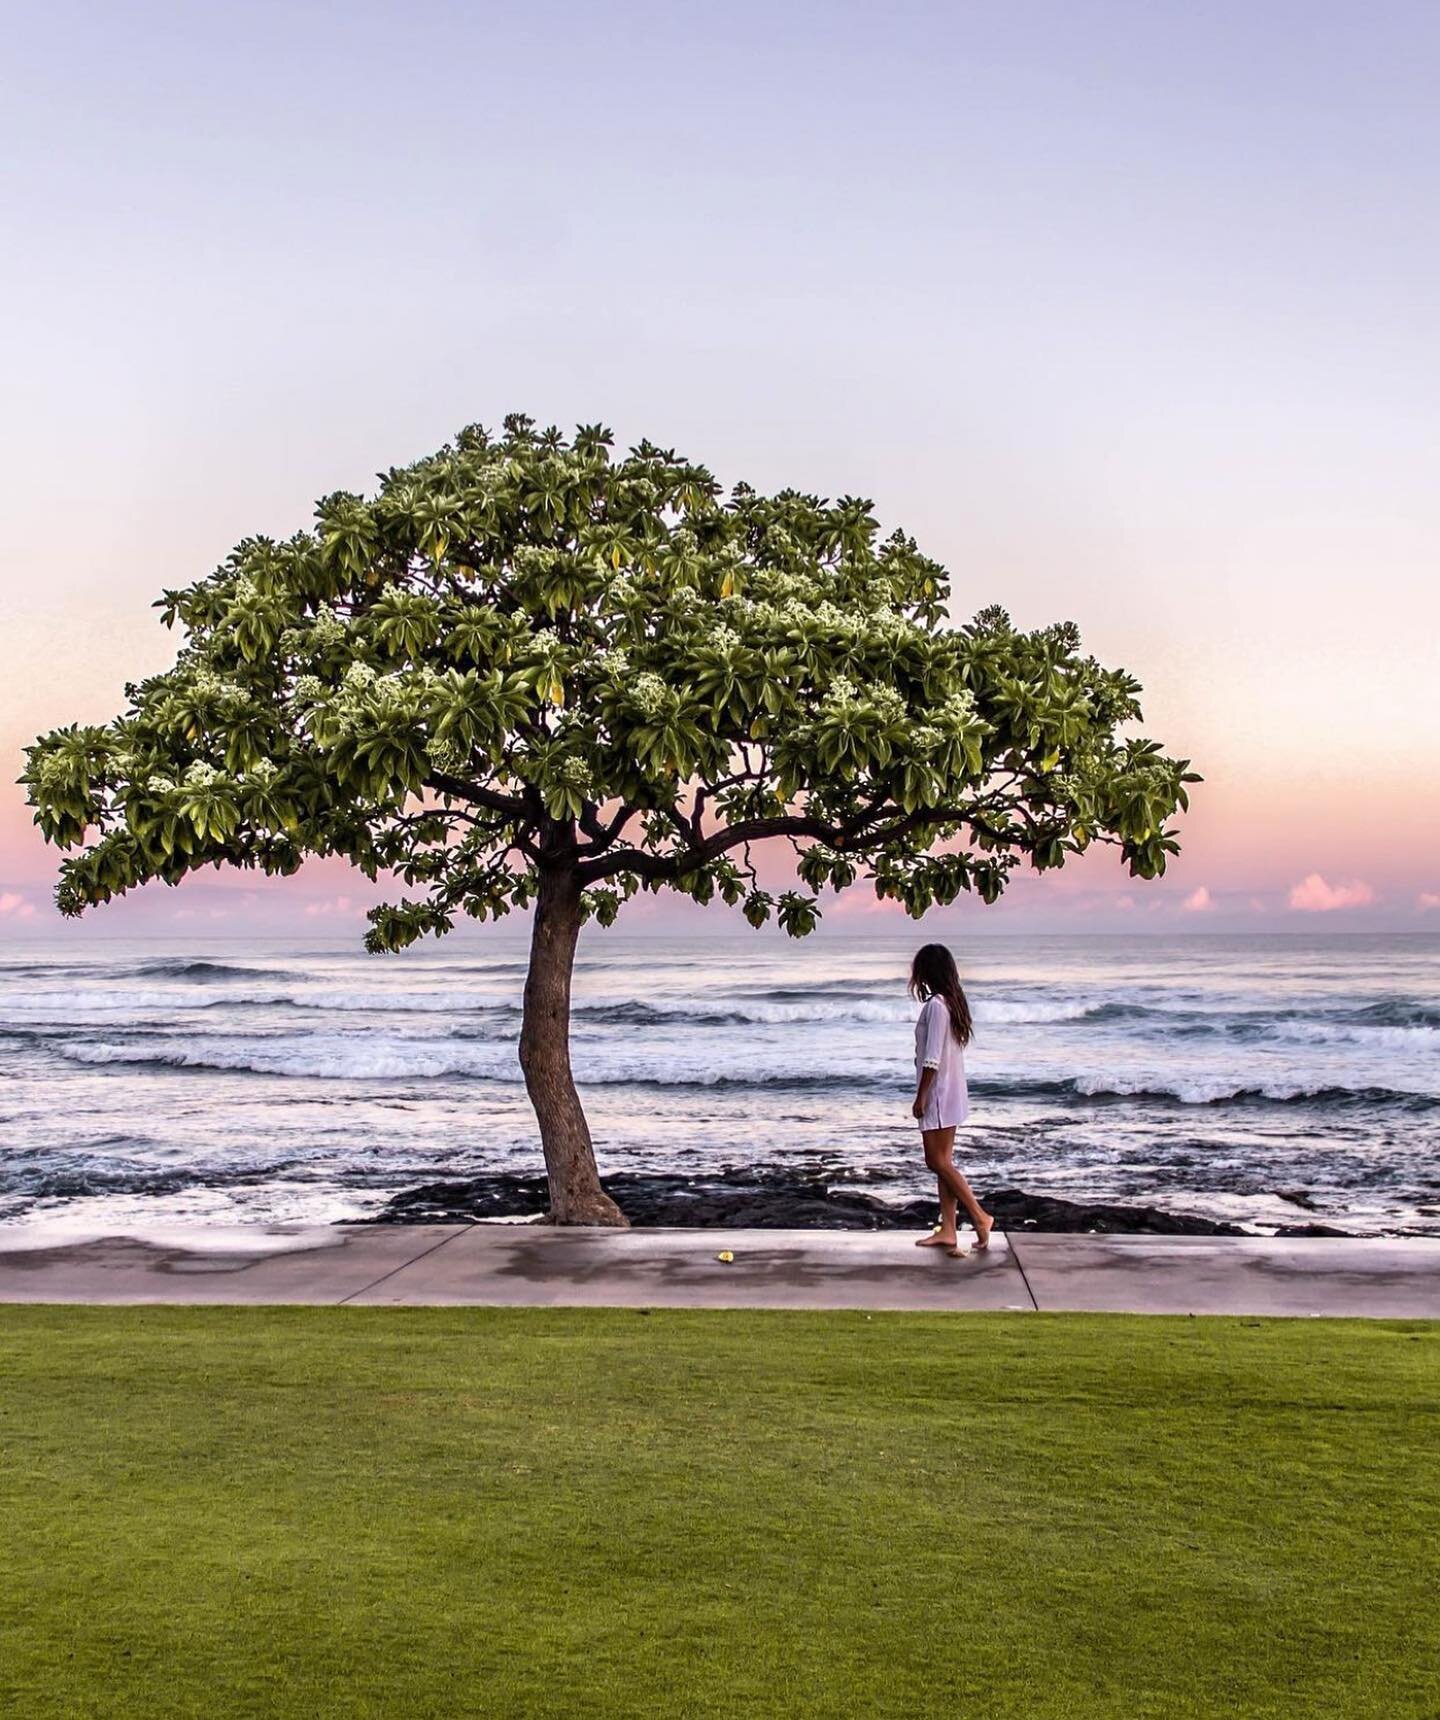 if you know, you know 🌳 
the magic that is @fshualalai 

pc: @anotherwriter @marcy_yu